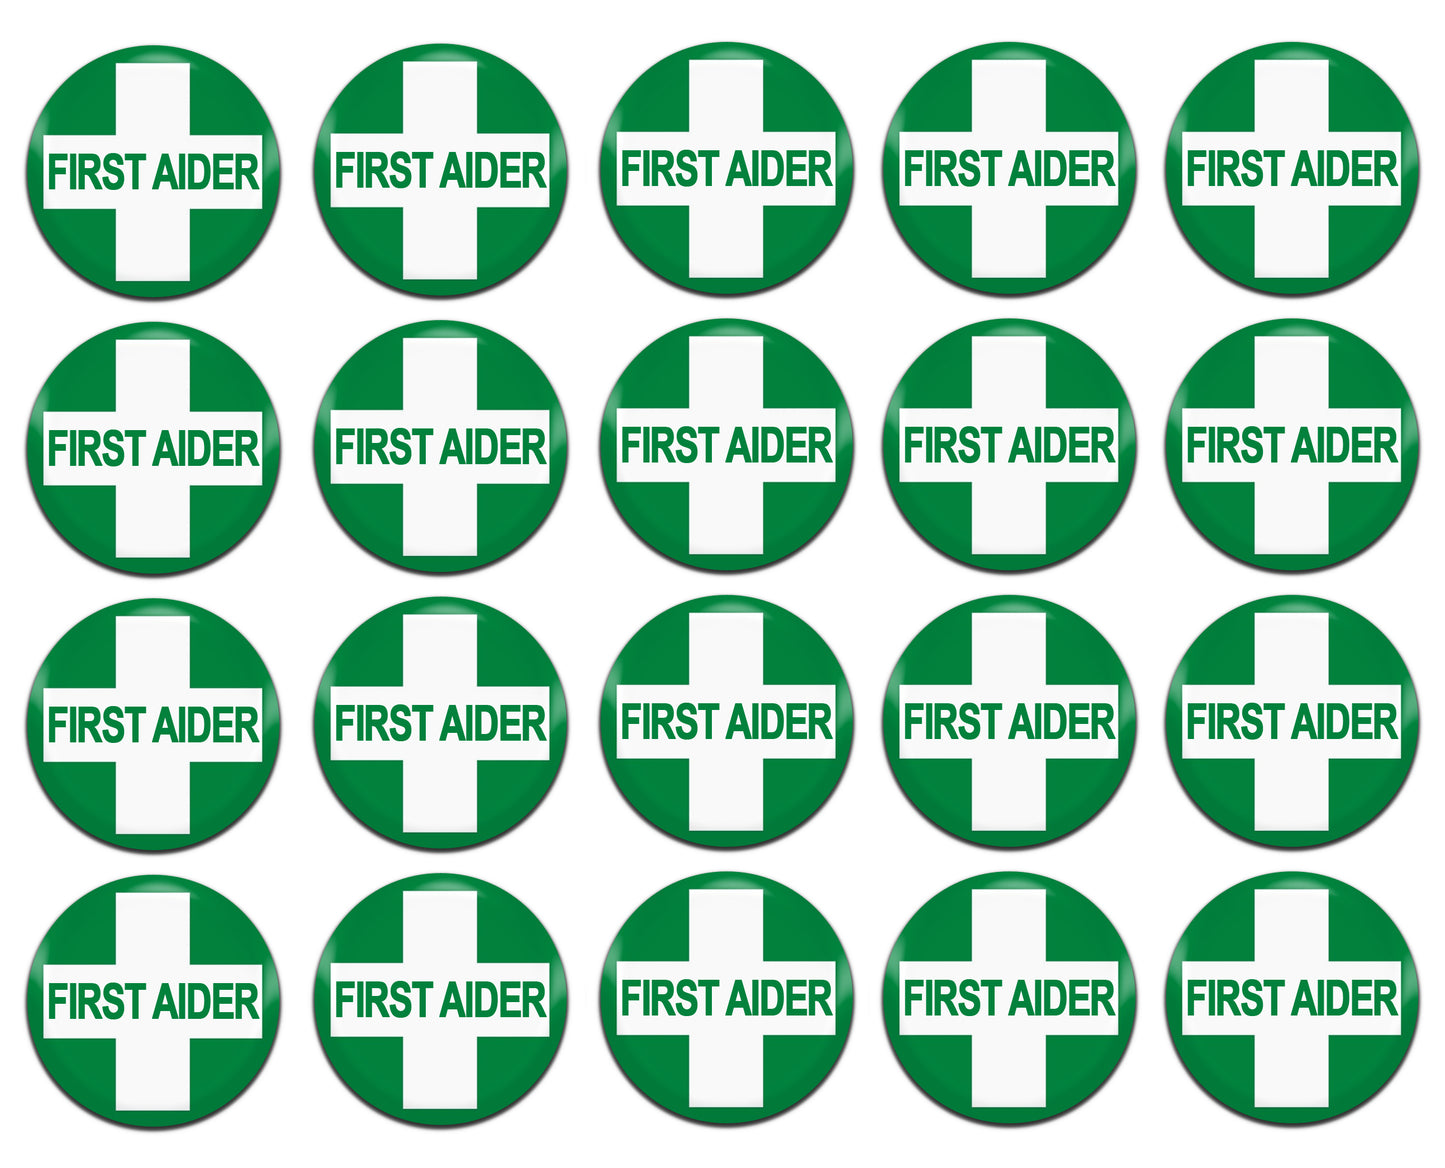 First Aider 25mm / 1 Inch D-Pin Button Badges (20x Set)